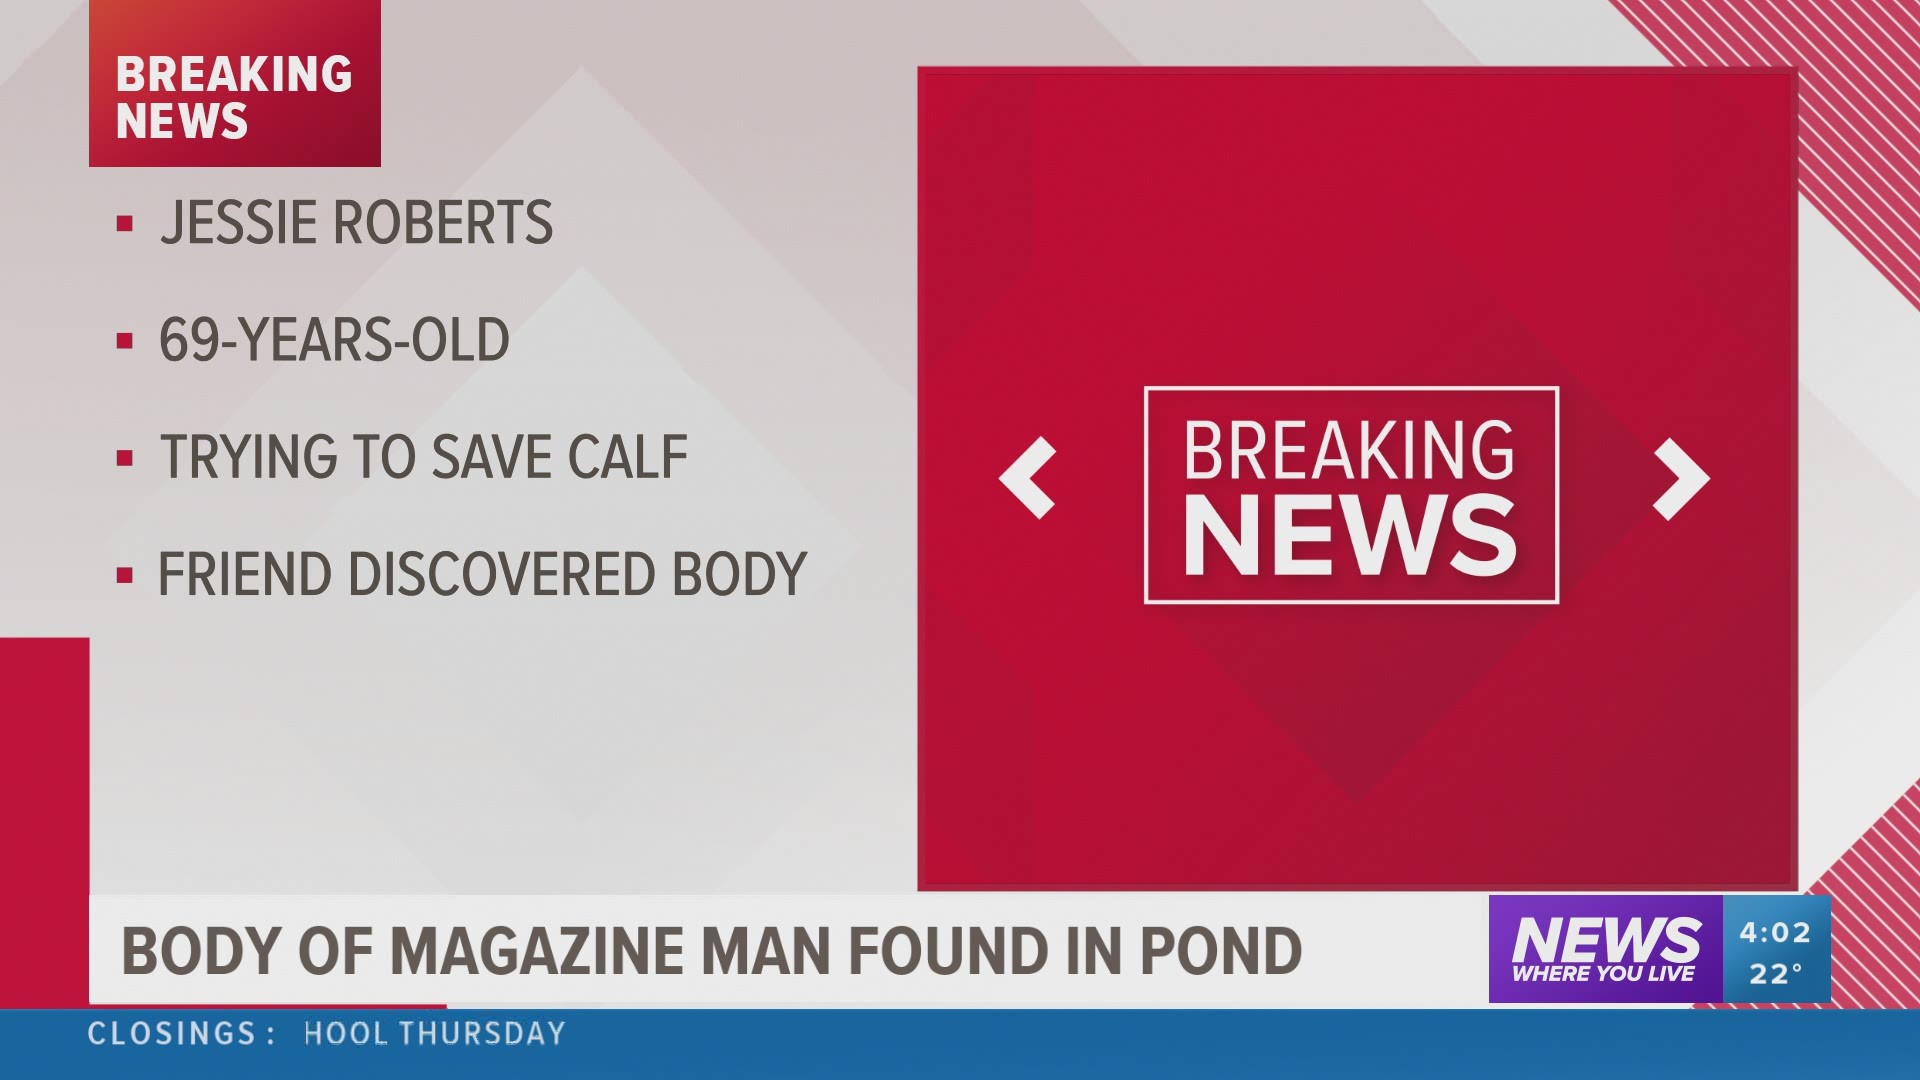 A man was found dead after trying to rescue a calf from a frozen pond in the Magazine area.